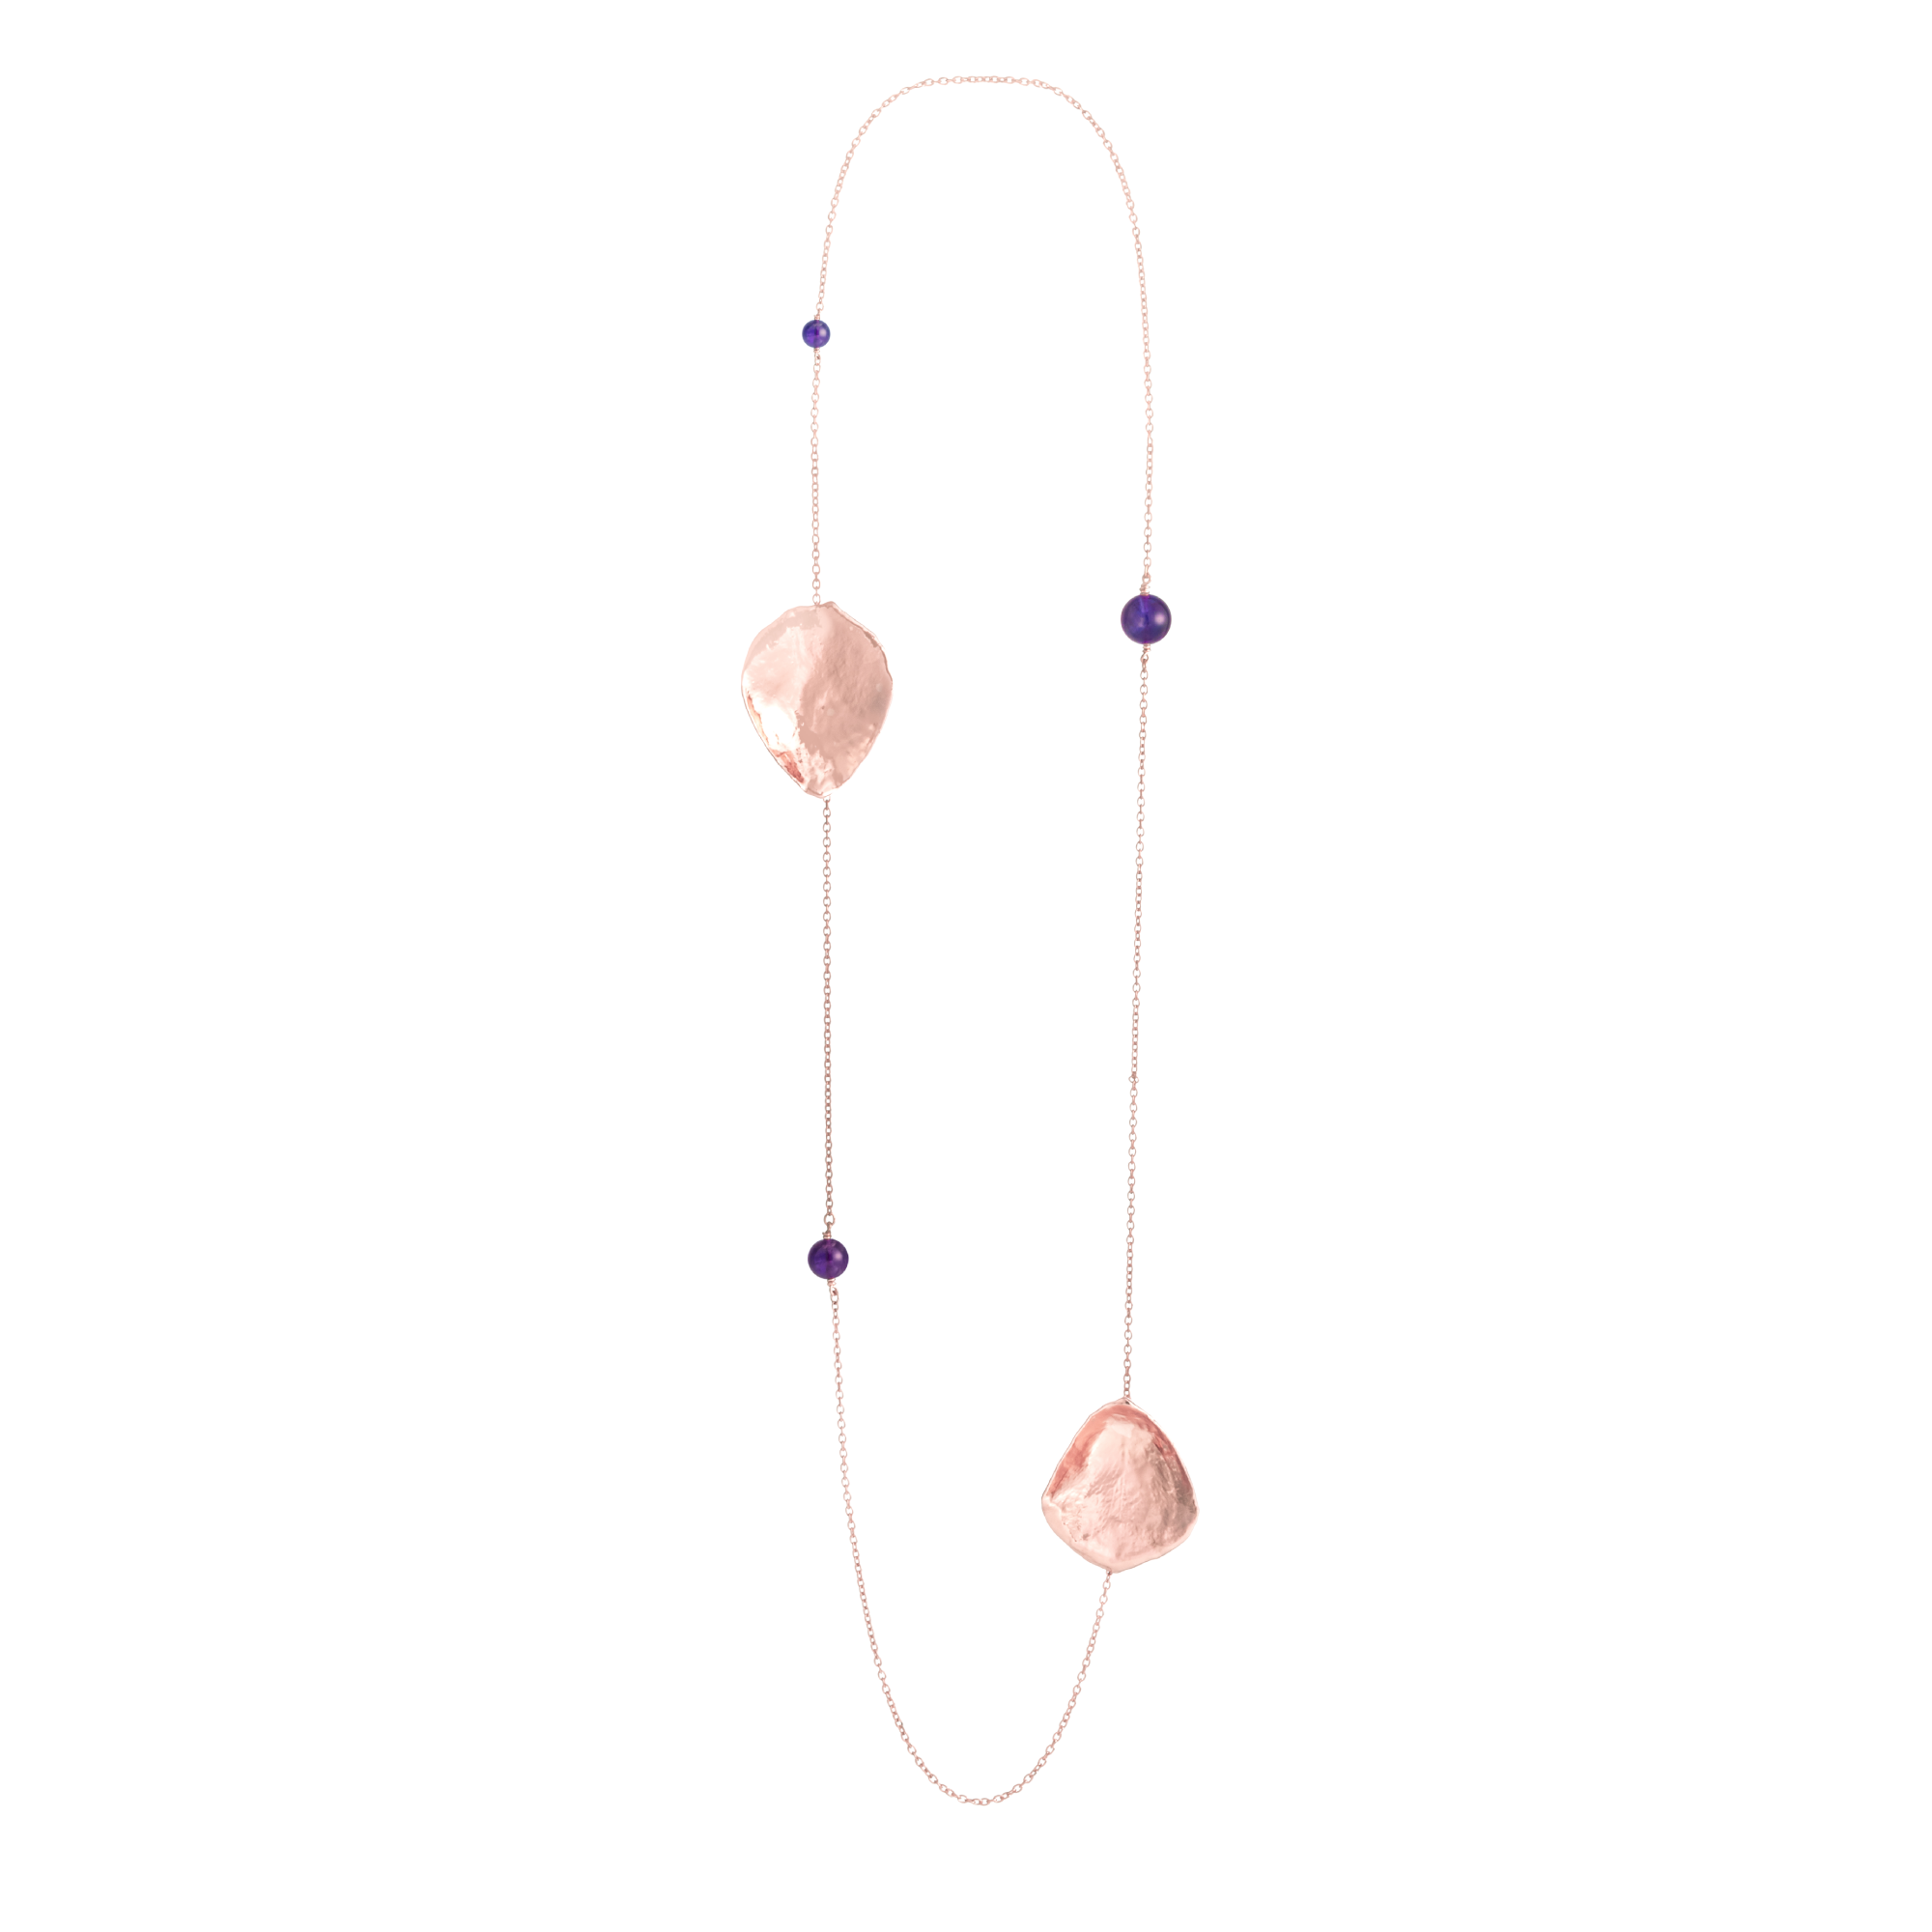 Love Rose Petals Necklace with Amethyst